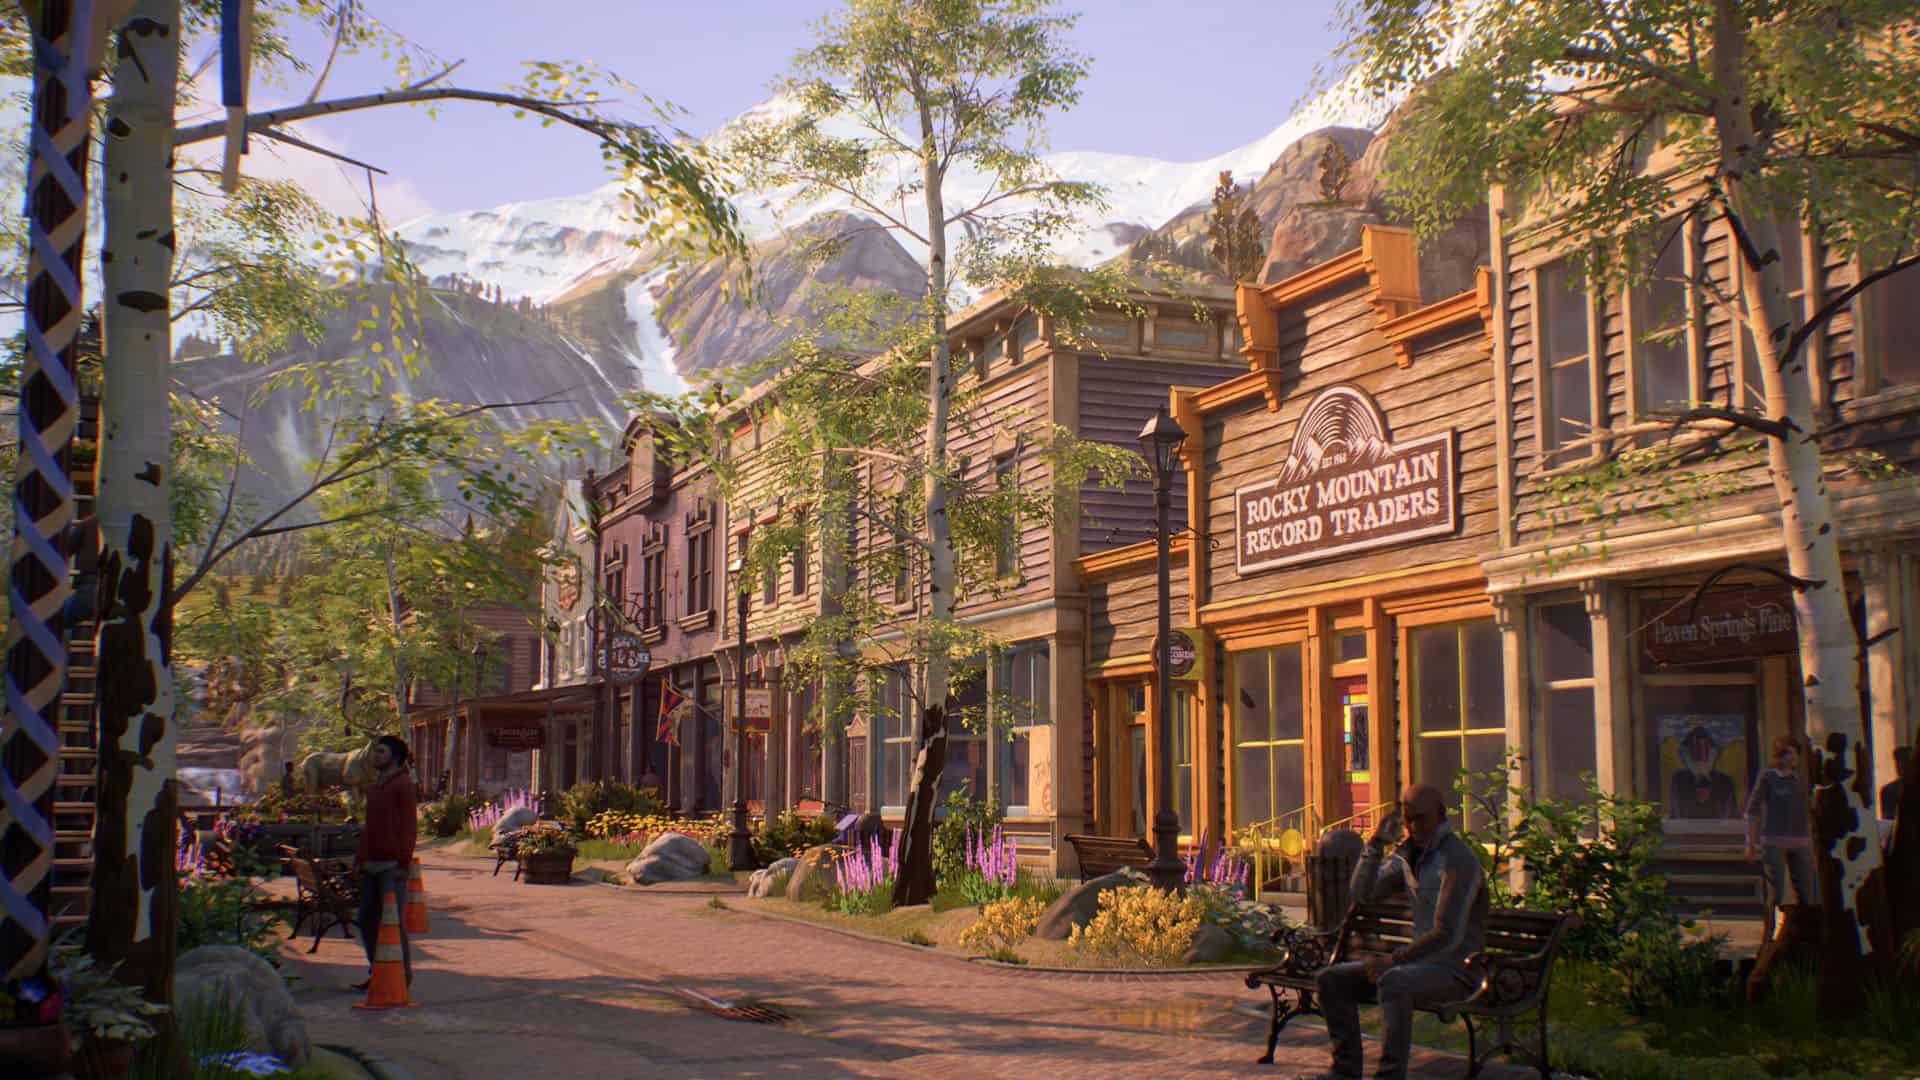 Life is Strange: True Colors welcomes you to Haven Springs in latest trailer